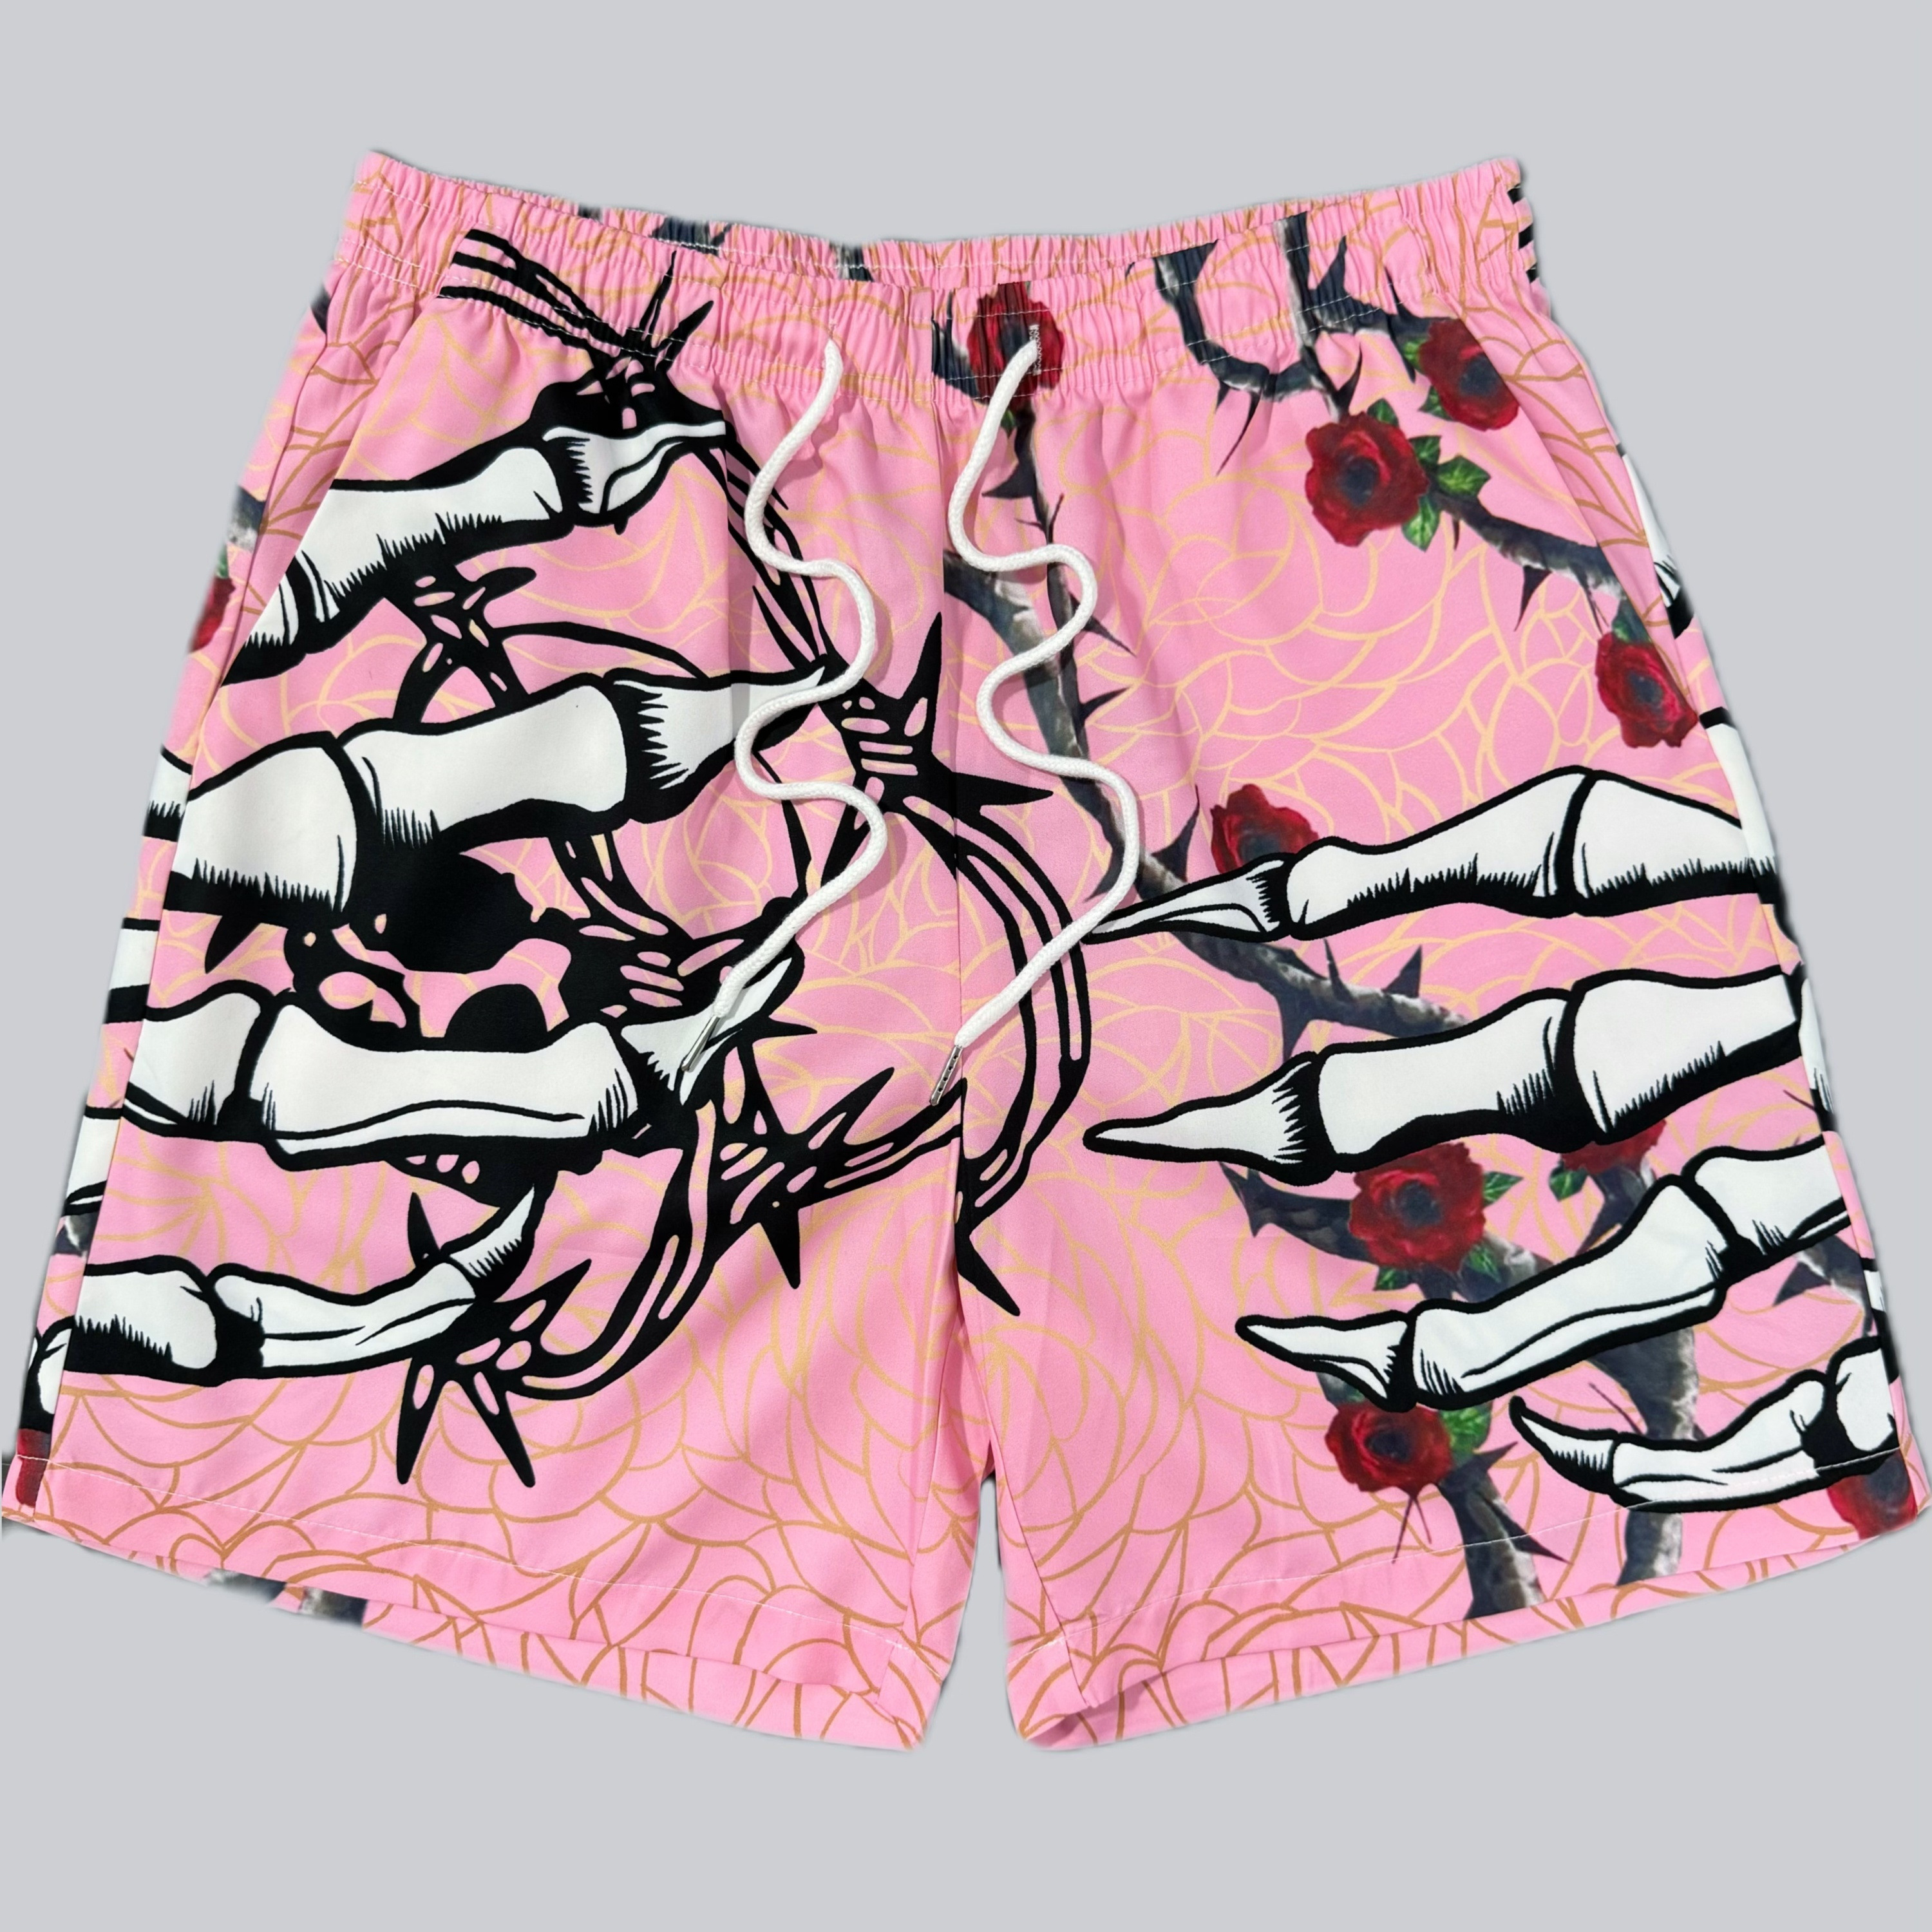 

Skeleton Thorn And Floral Pattern Men's Casual Shorts With Drawstring And Pockets, Novel And Chic Shorts For Summer Street And Holiday Wear